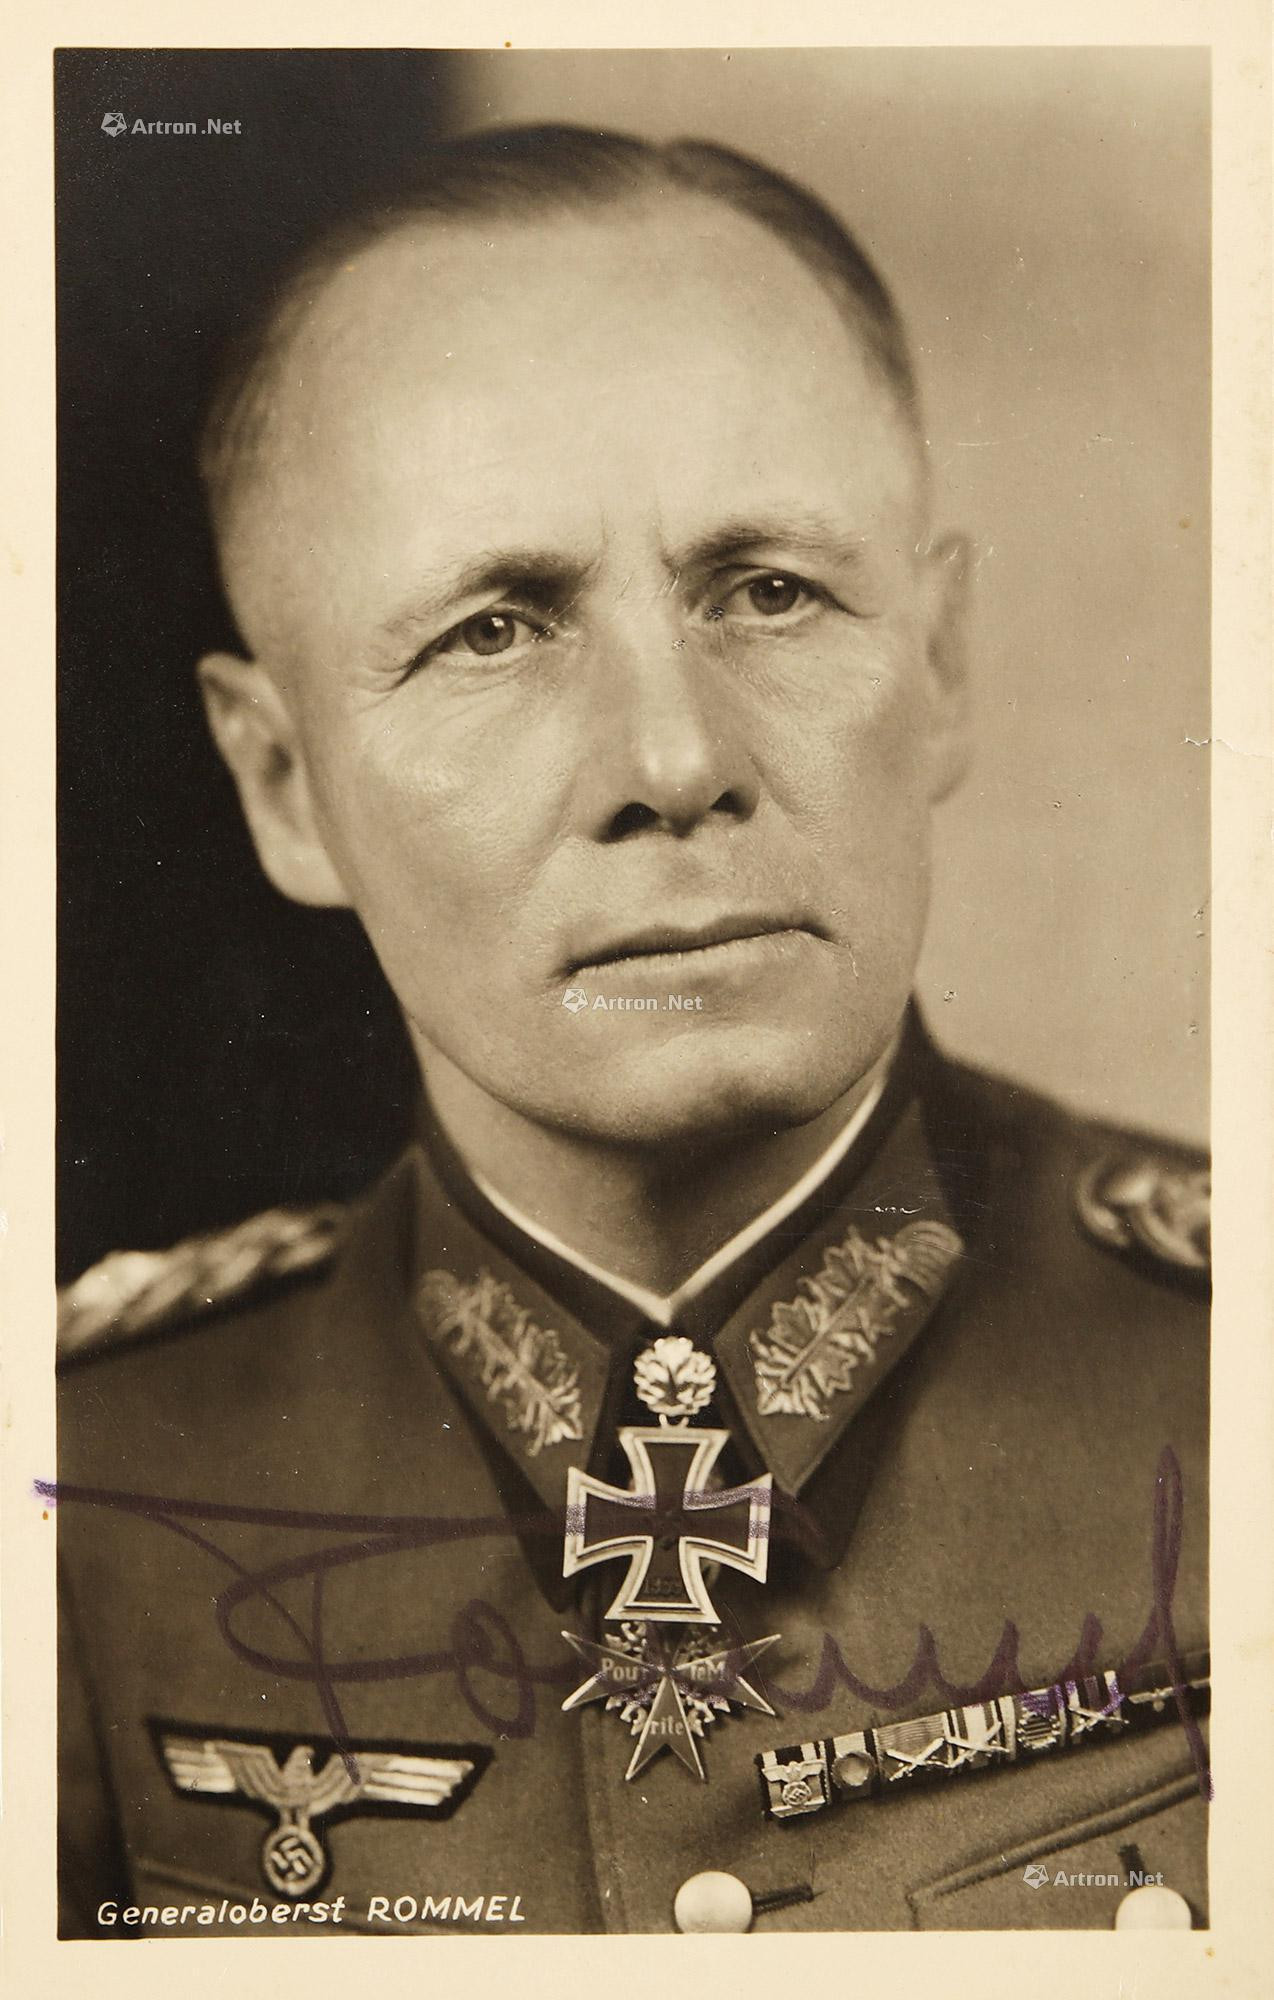 Autographed photo by Erwin Rommel， the“German Field marshal”， with COA